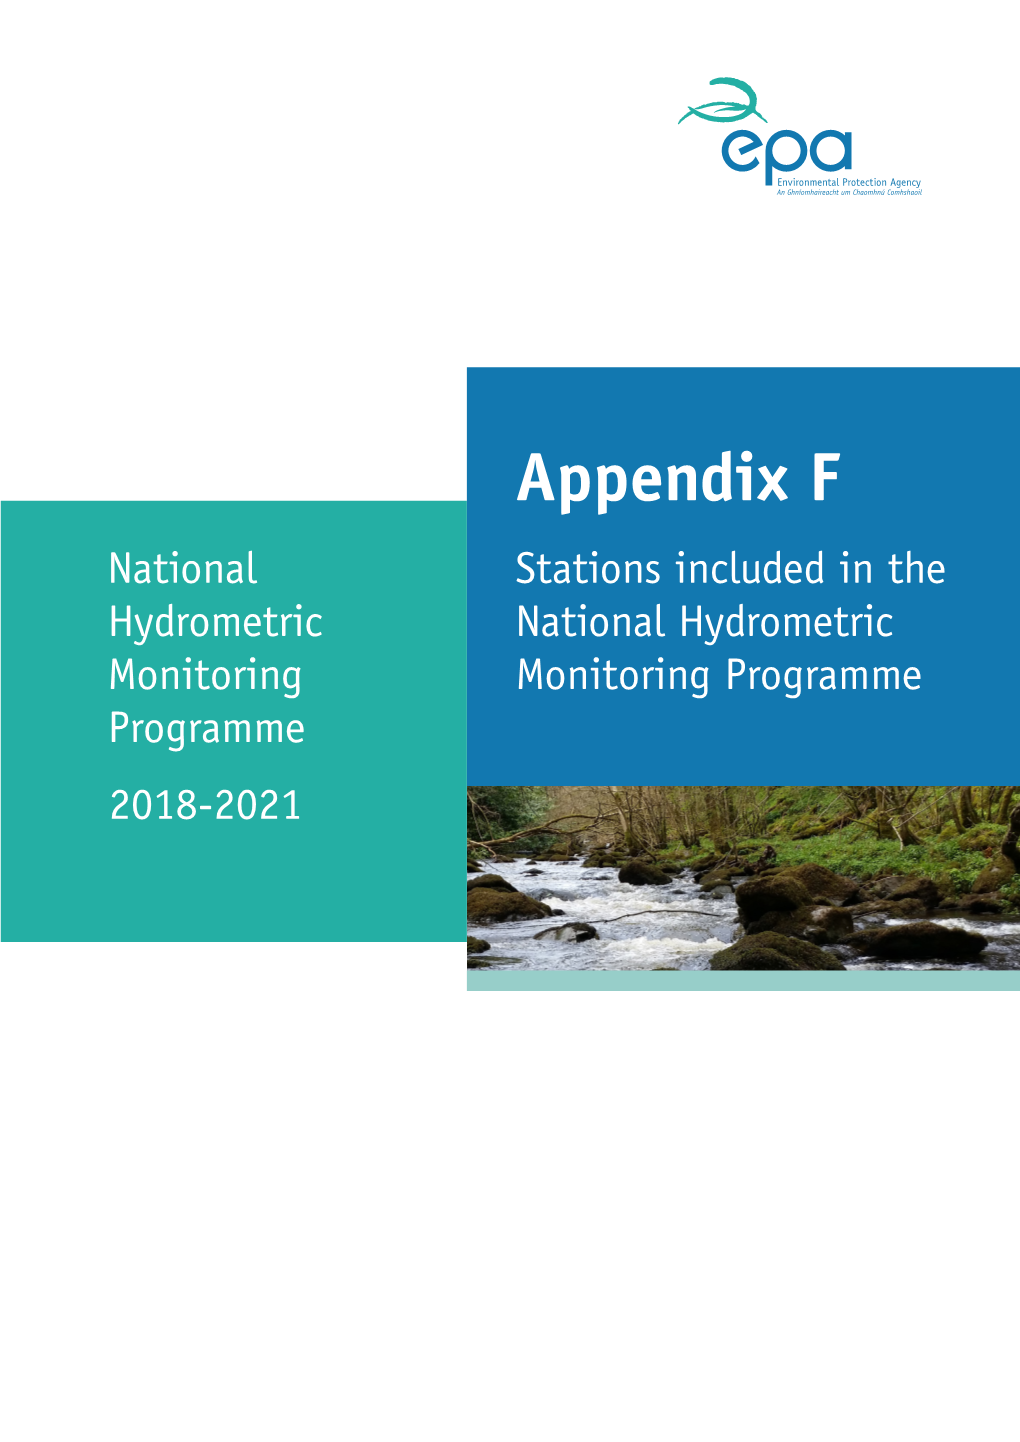 Appendix F: Stations Included in the National Hydrometric Monitoring